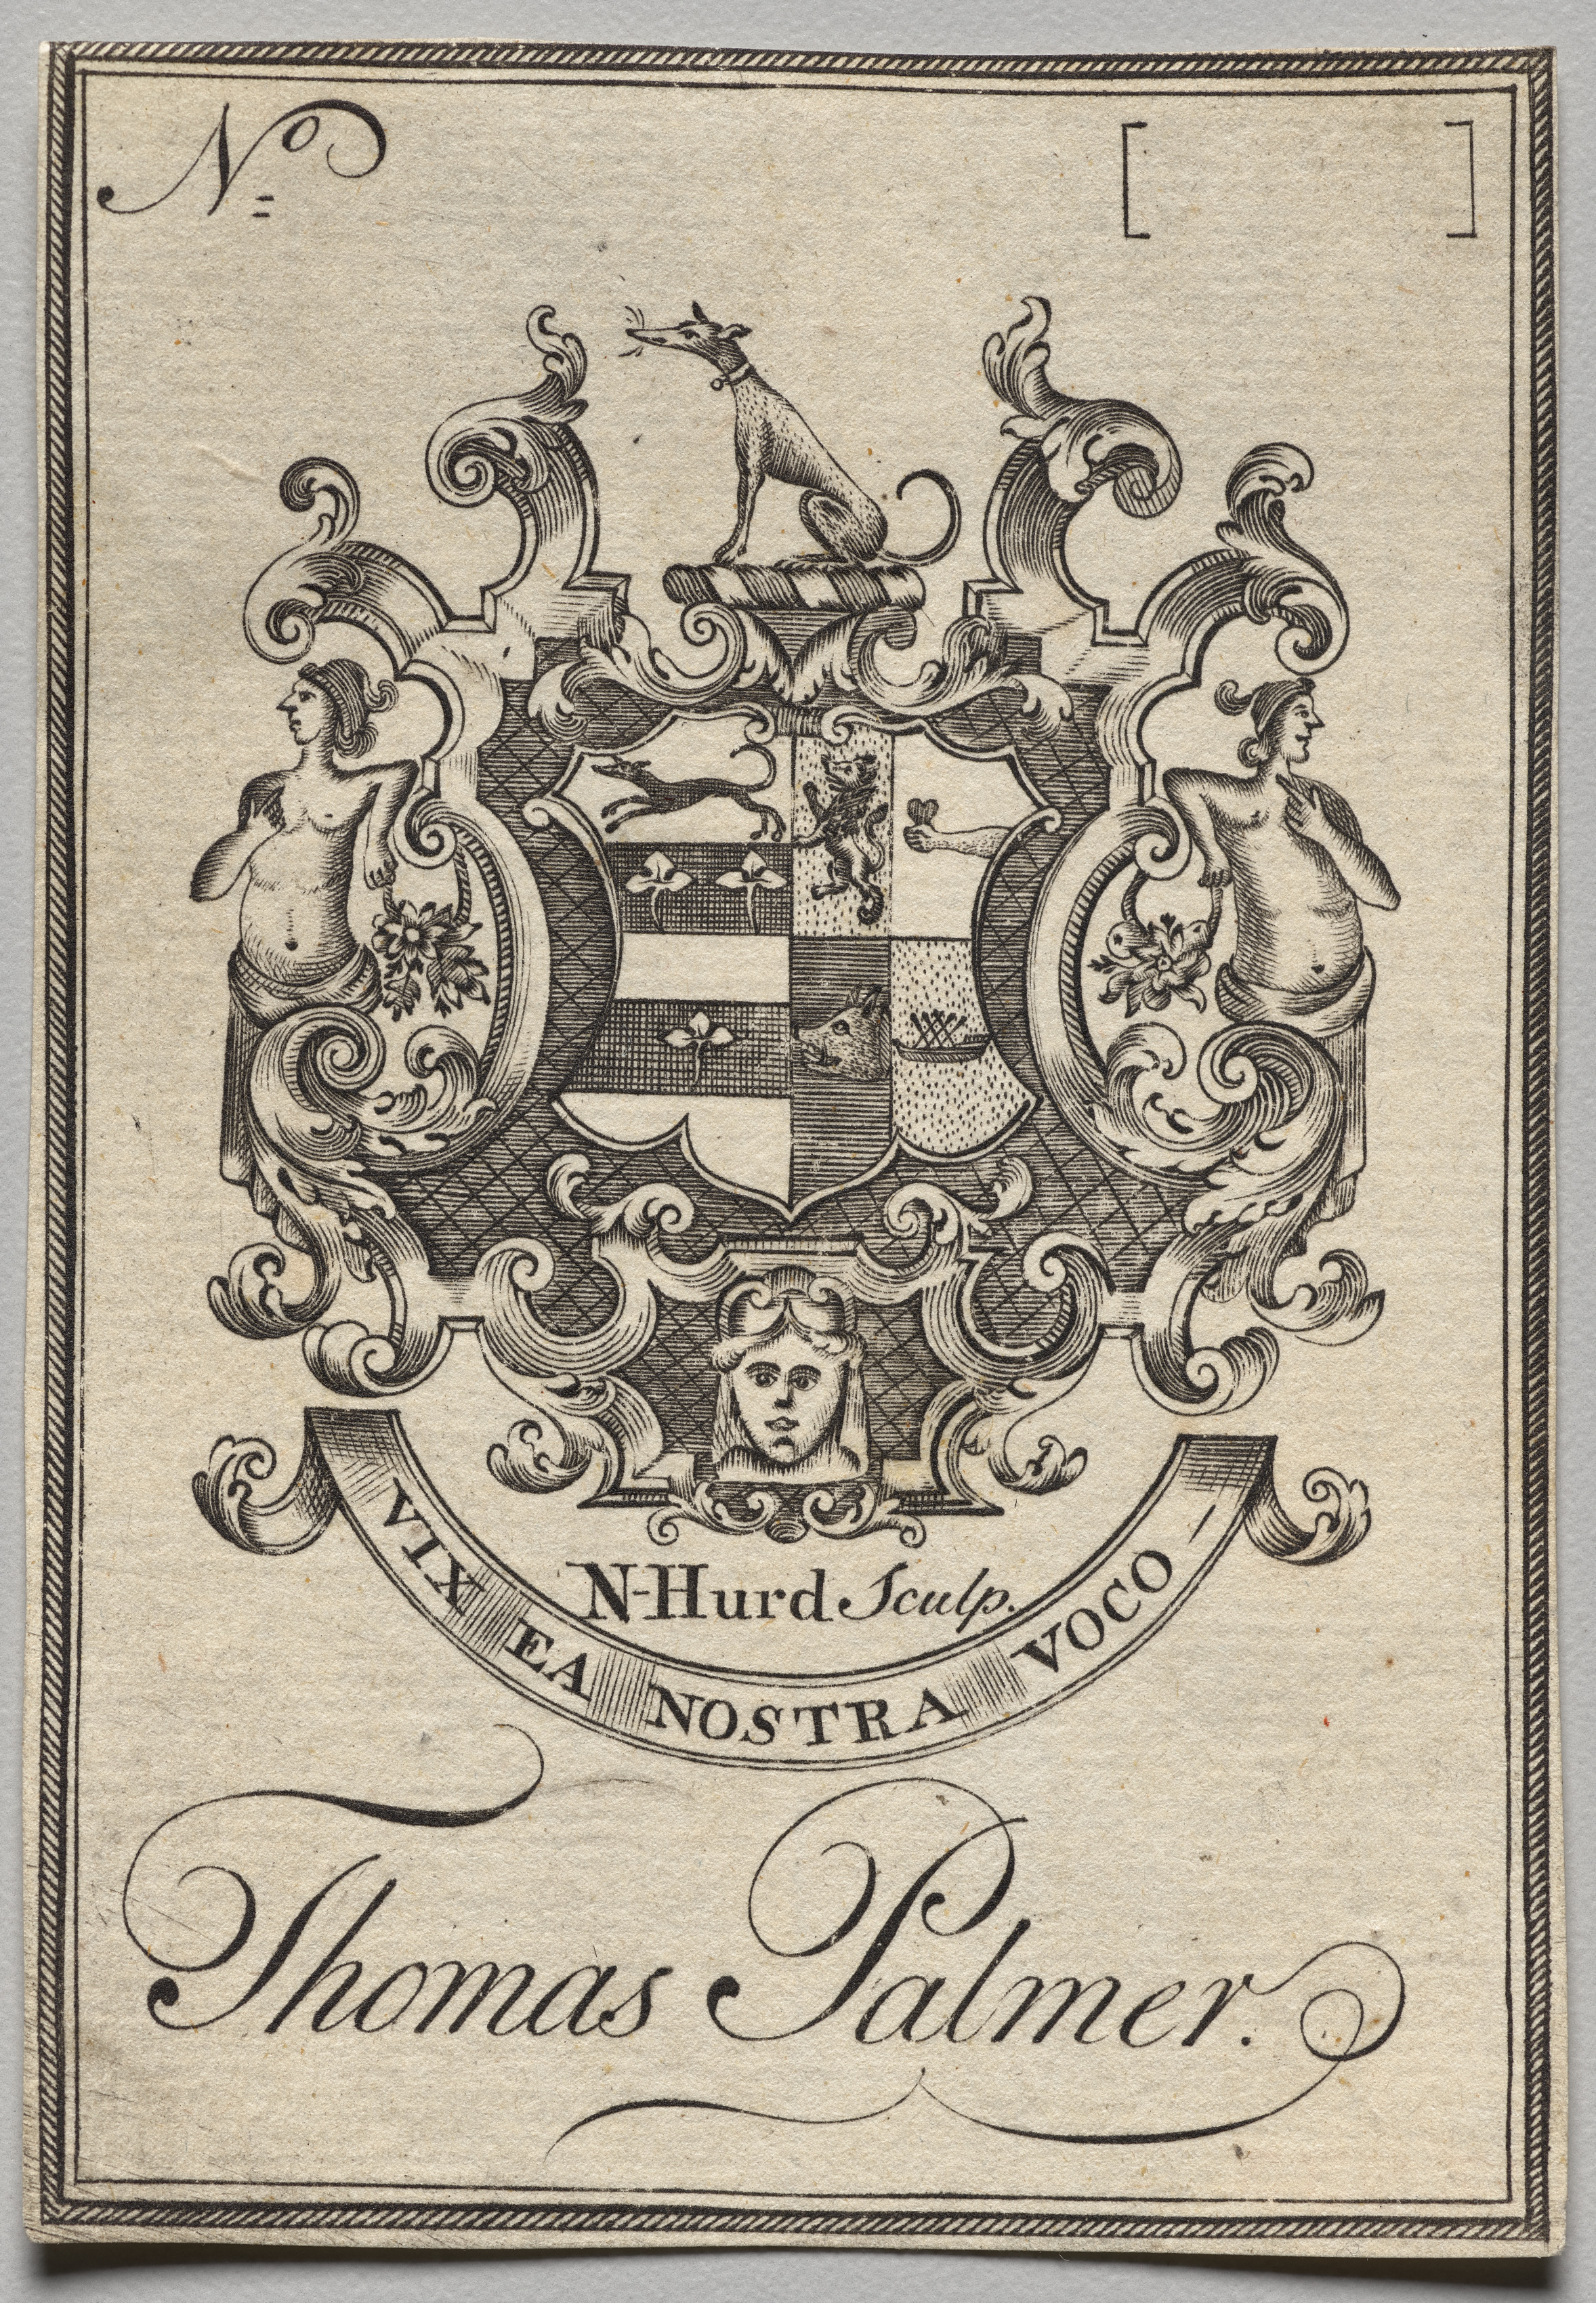 Bookplate:  Coat of Arms with Thomas Palmer inscribed